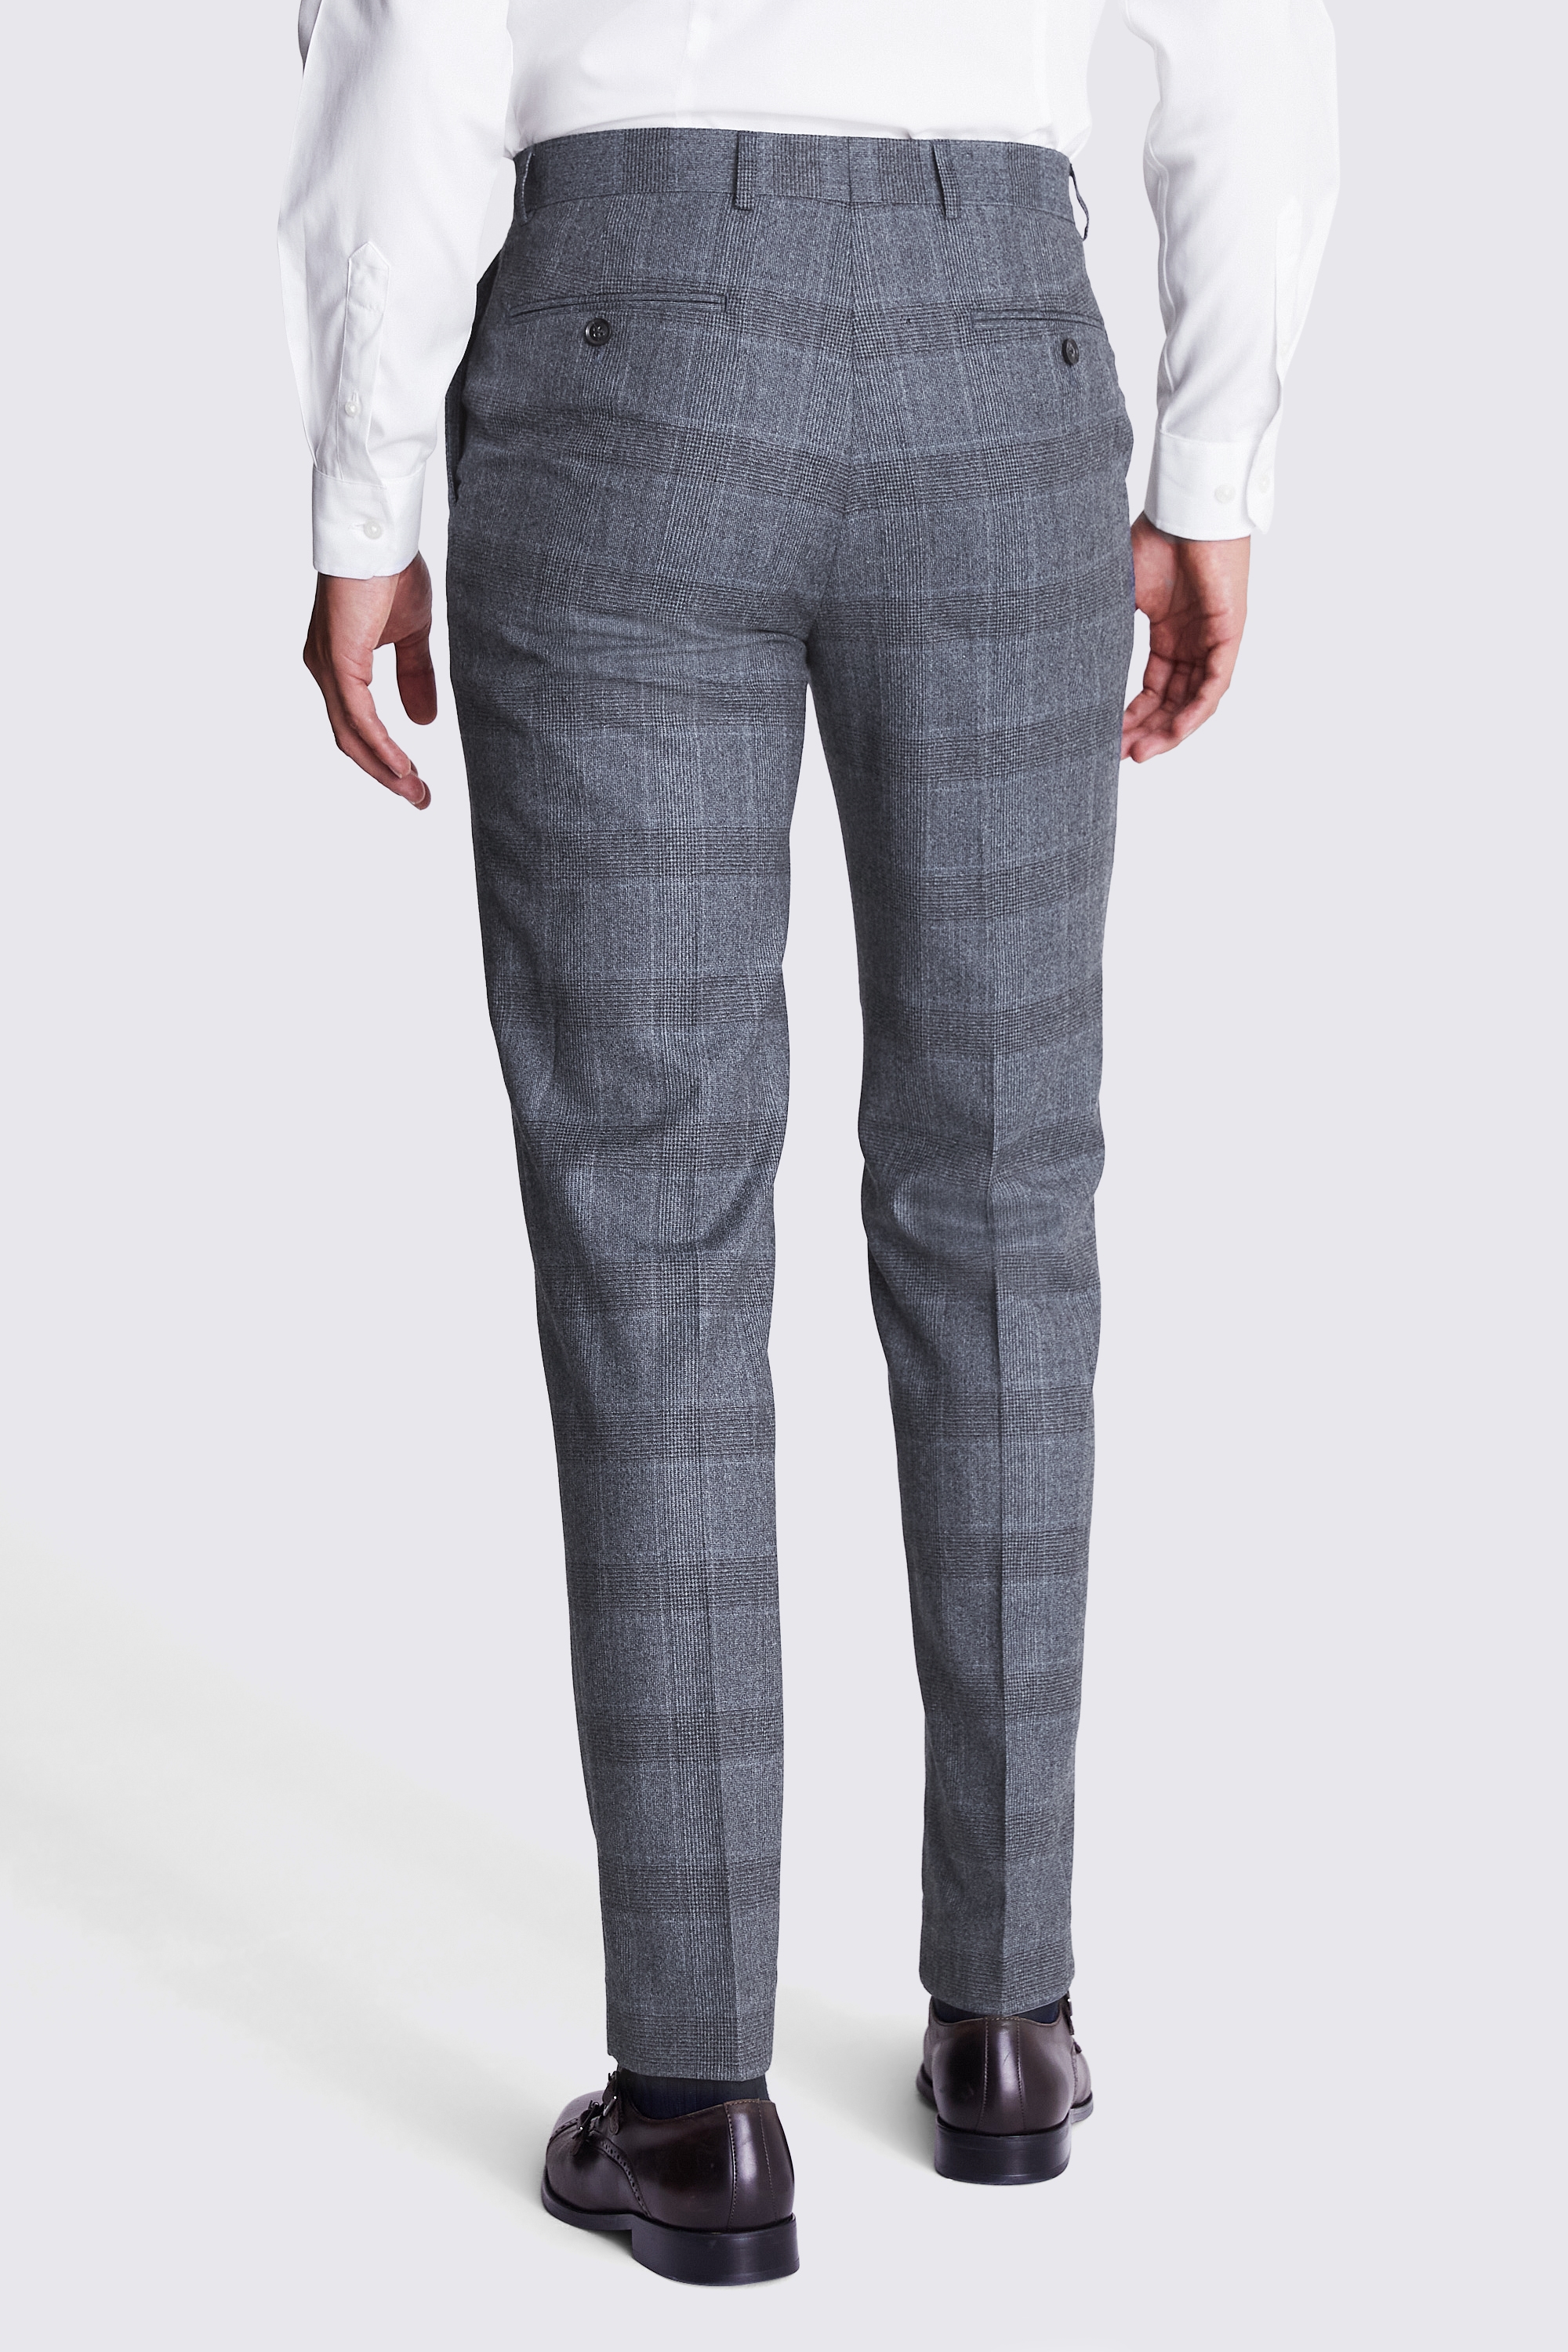 Italian Tailored Fit Grey Check Trousers | Buy Online at Moss